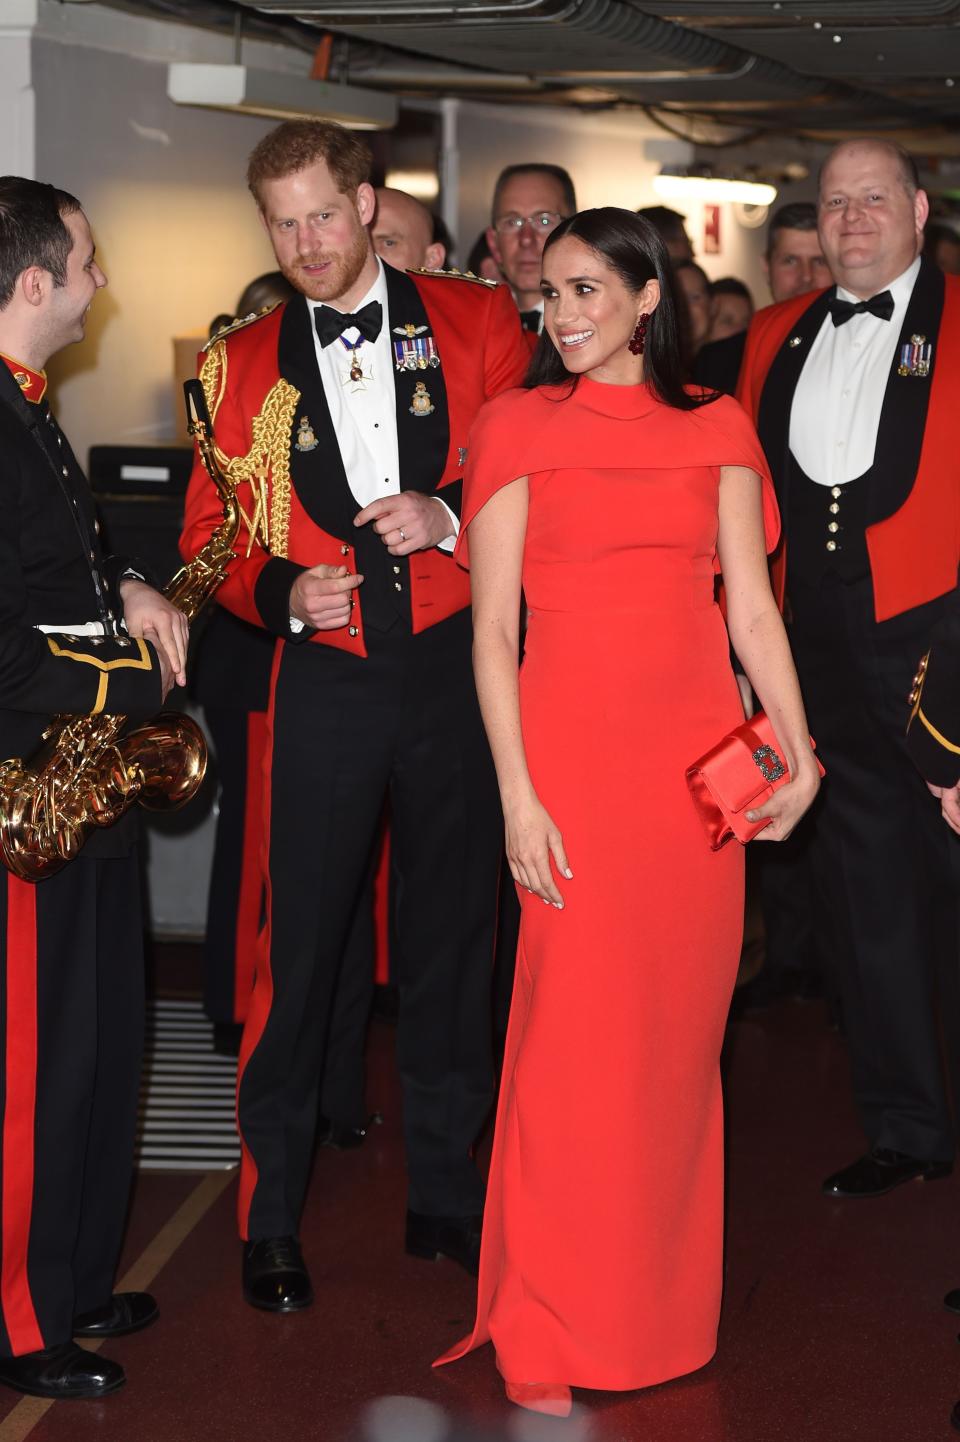 Britain's Prince Harry, Duke of Sussex and Meghan, Duchess of Sussex arrive to attend The Mountbatten Festival of Music at the Royal Albert Hall in London on March 7, 2020. - The Festival brings together world-class musicians, composers and conductors of the Massed Bands of Her Majestys Royal Marines. This year, the performance will mark the 75th anniversary of the end of the Second World War and the 80th anniversary of the formation of Britains Commandos. (Photo by Eddie MULHOLLAND / POOL / AFP) (Photo by EDDIE MULHOLLAND/POOL/AFP via Getty Images)